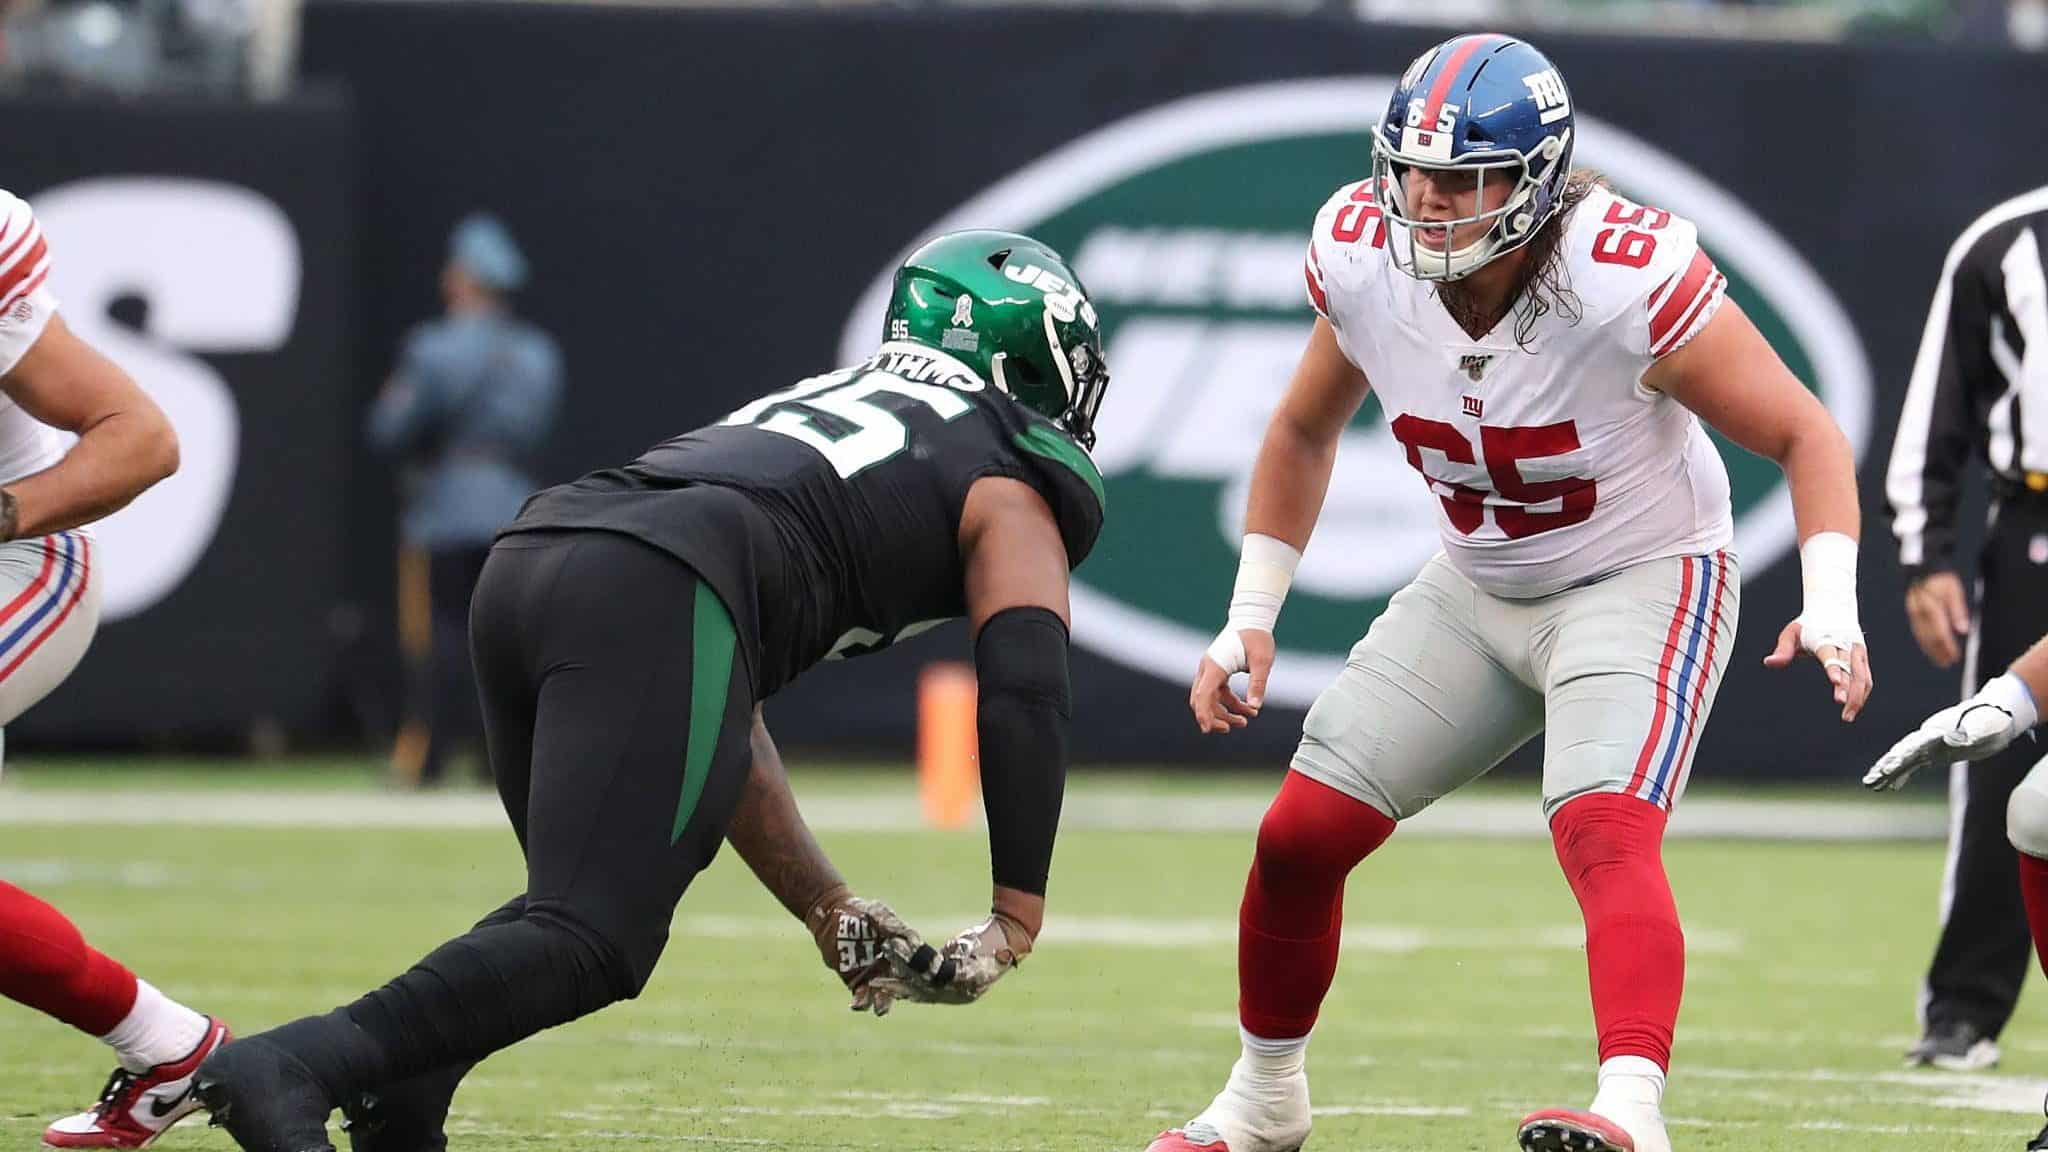 EAST RUTHERFORD, NEW JERSEY - NOVEMBER 10: Nick Gates #65 of the New York Giants in action against the New York Jsets during their game at MetLife Stadium on November 10, 2019 in East Rutherford, New Jersey.